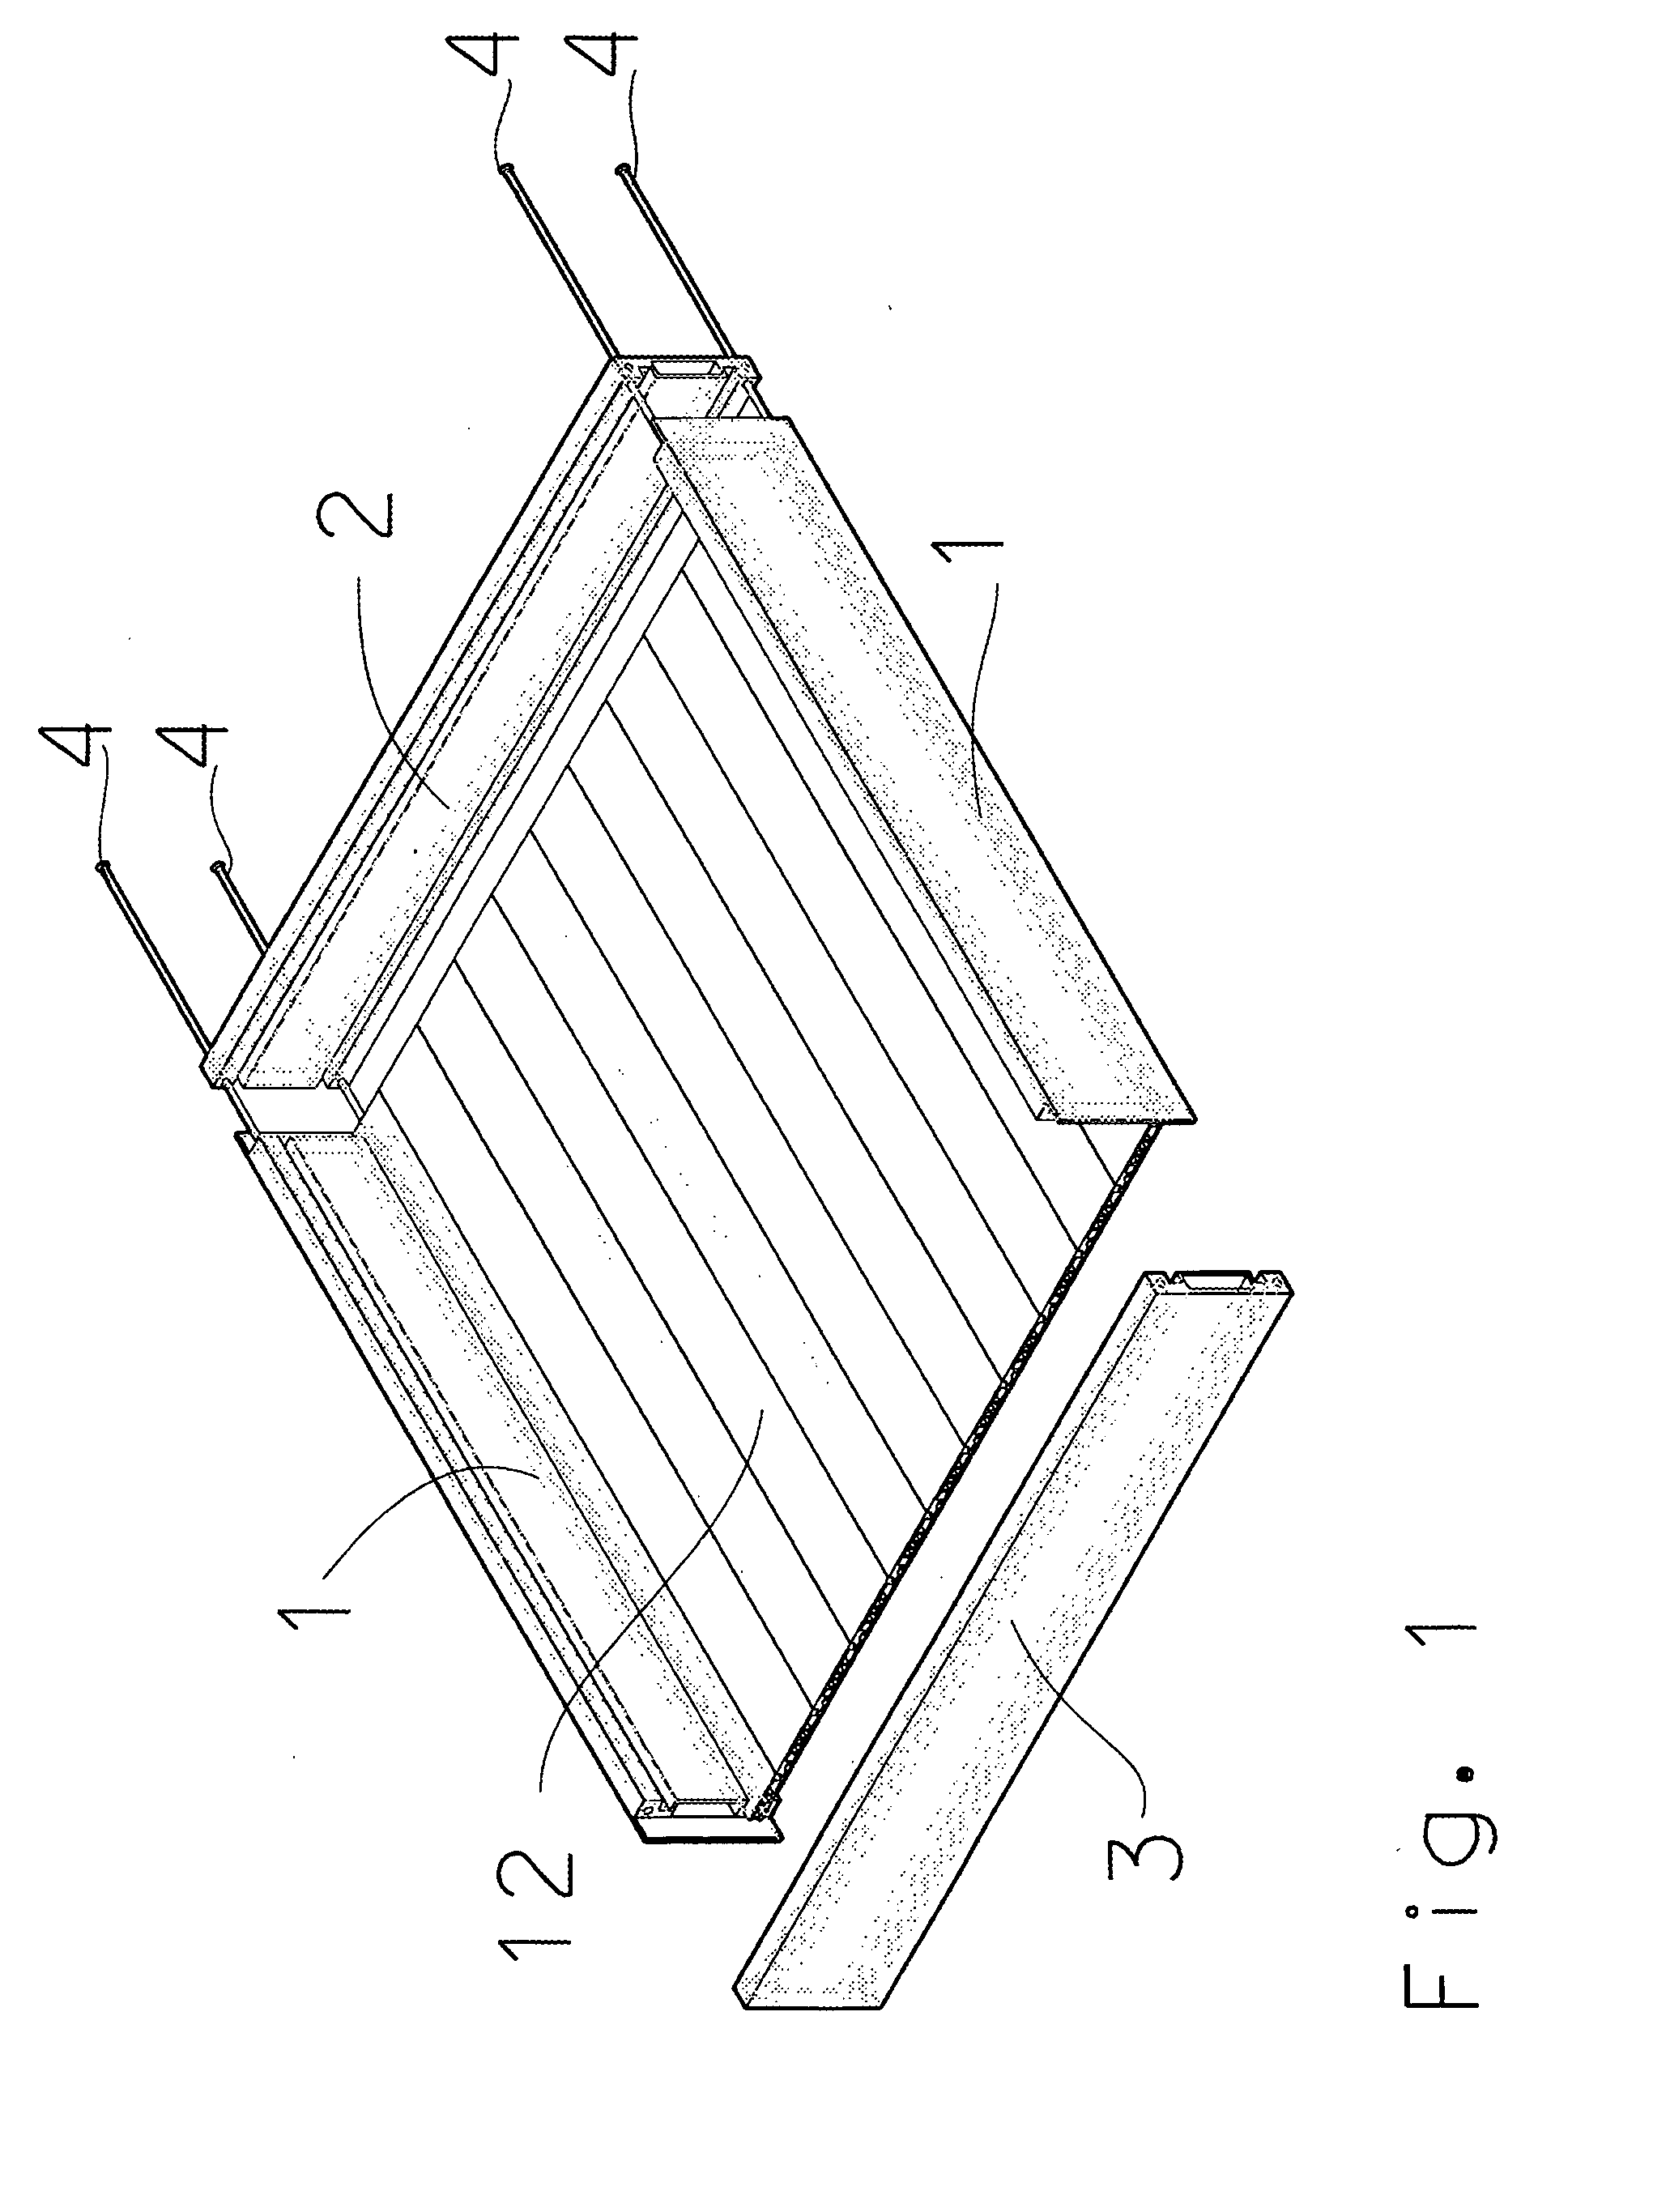 Drawer Which Can Be Dismantled and Stacked